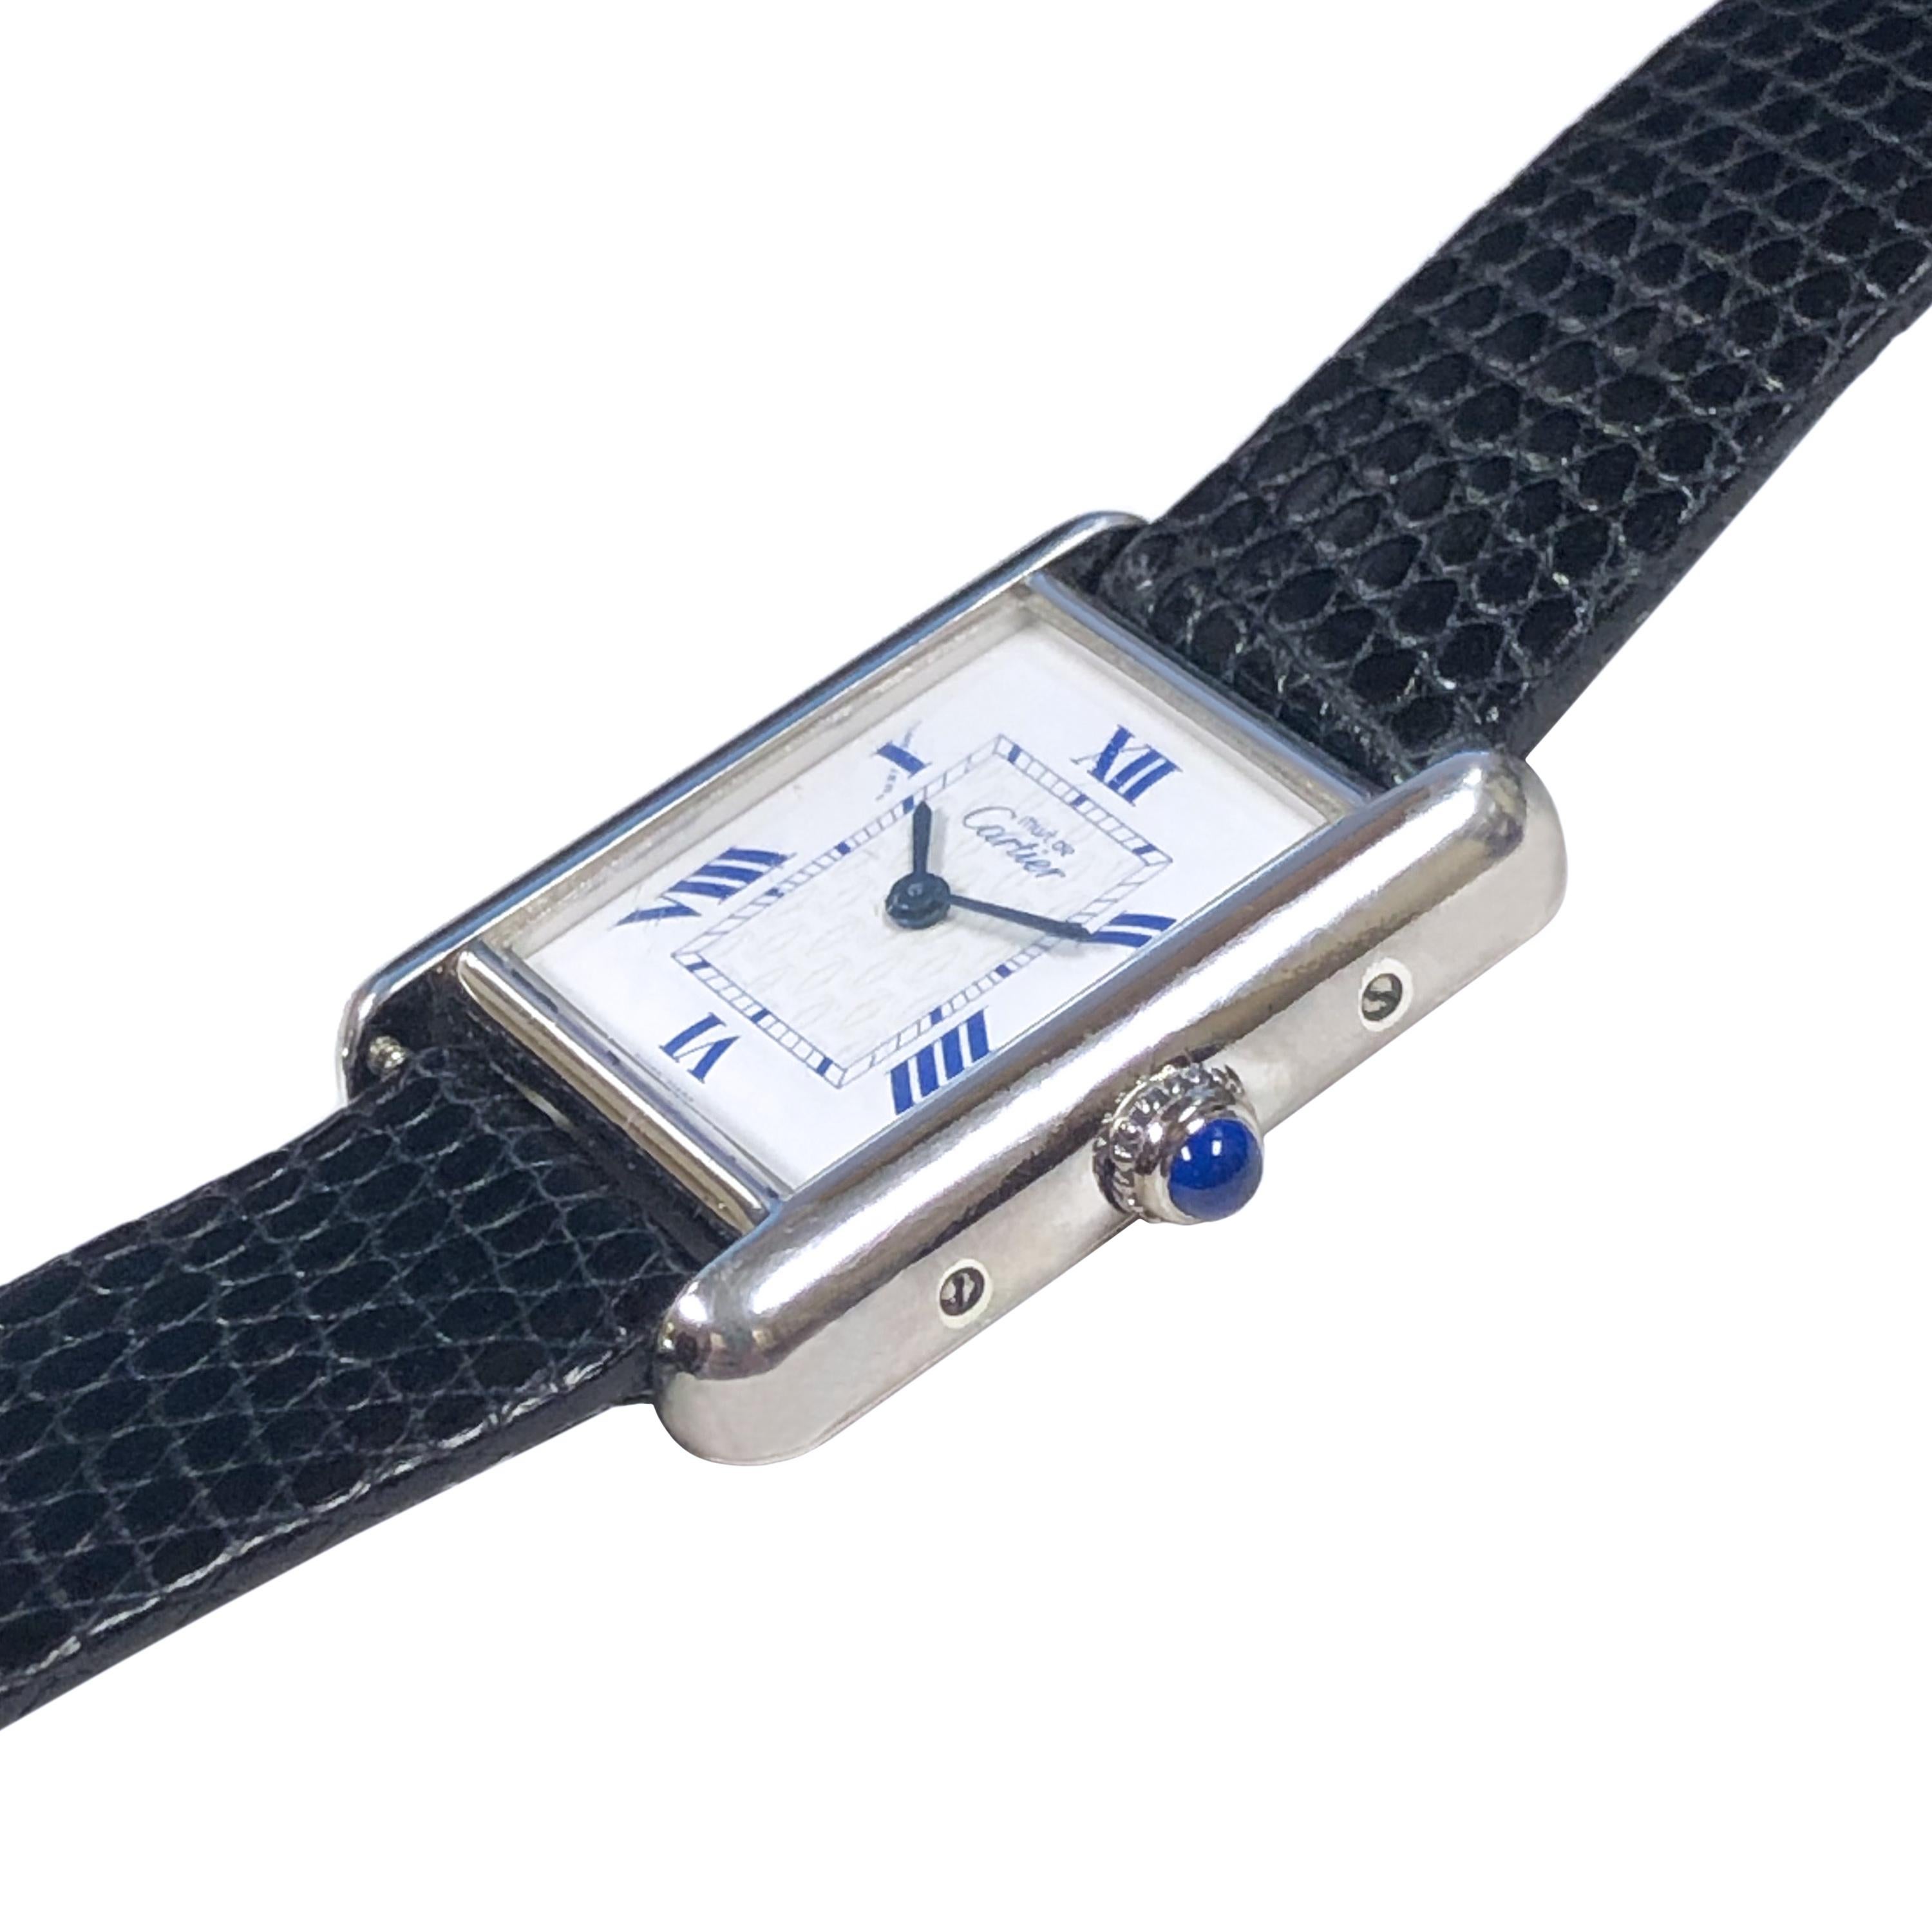 Circa 2000 Cartier, Must De Cartier Wrist Watch, 29 X 22 M.M. 2 piece water resistant Sterling Silver case. Quartz movement, White Dial with Blue Roman Numerals and Cartier CC logo center. New Black Lizard strap with original Silvered Tang Buckle.